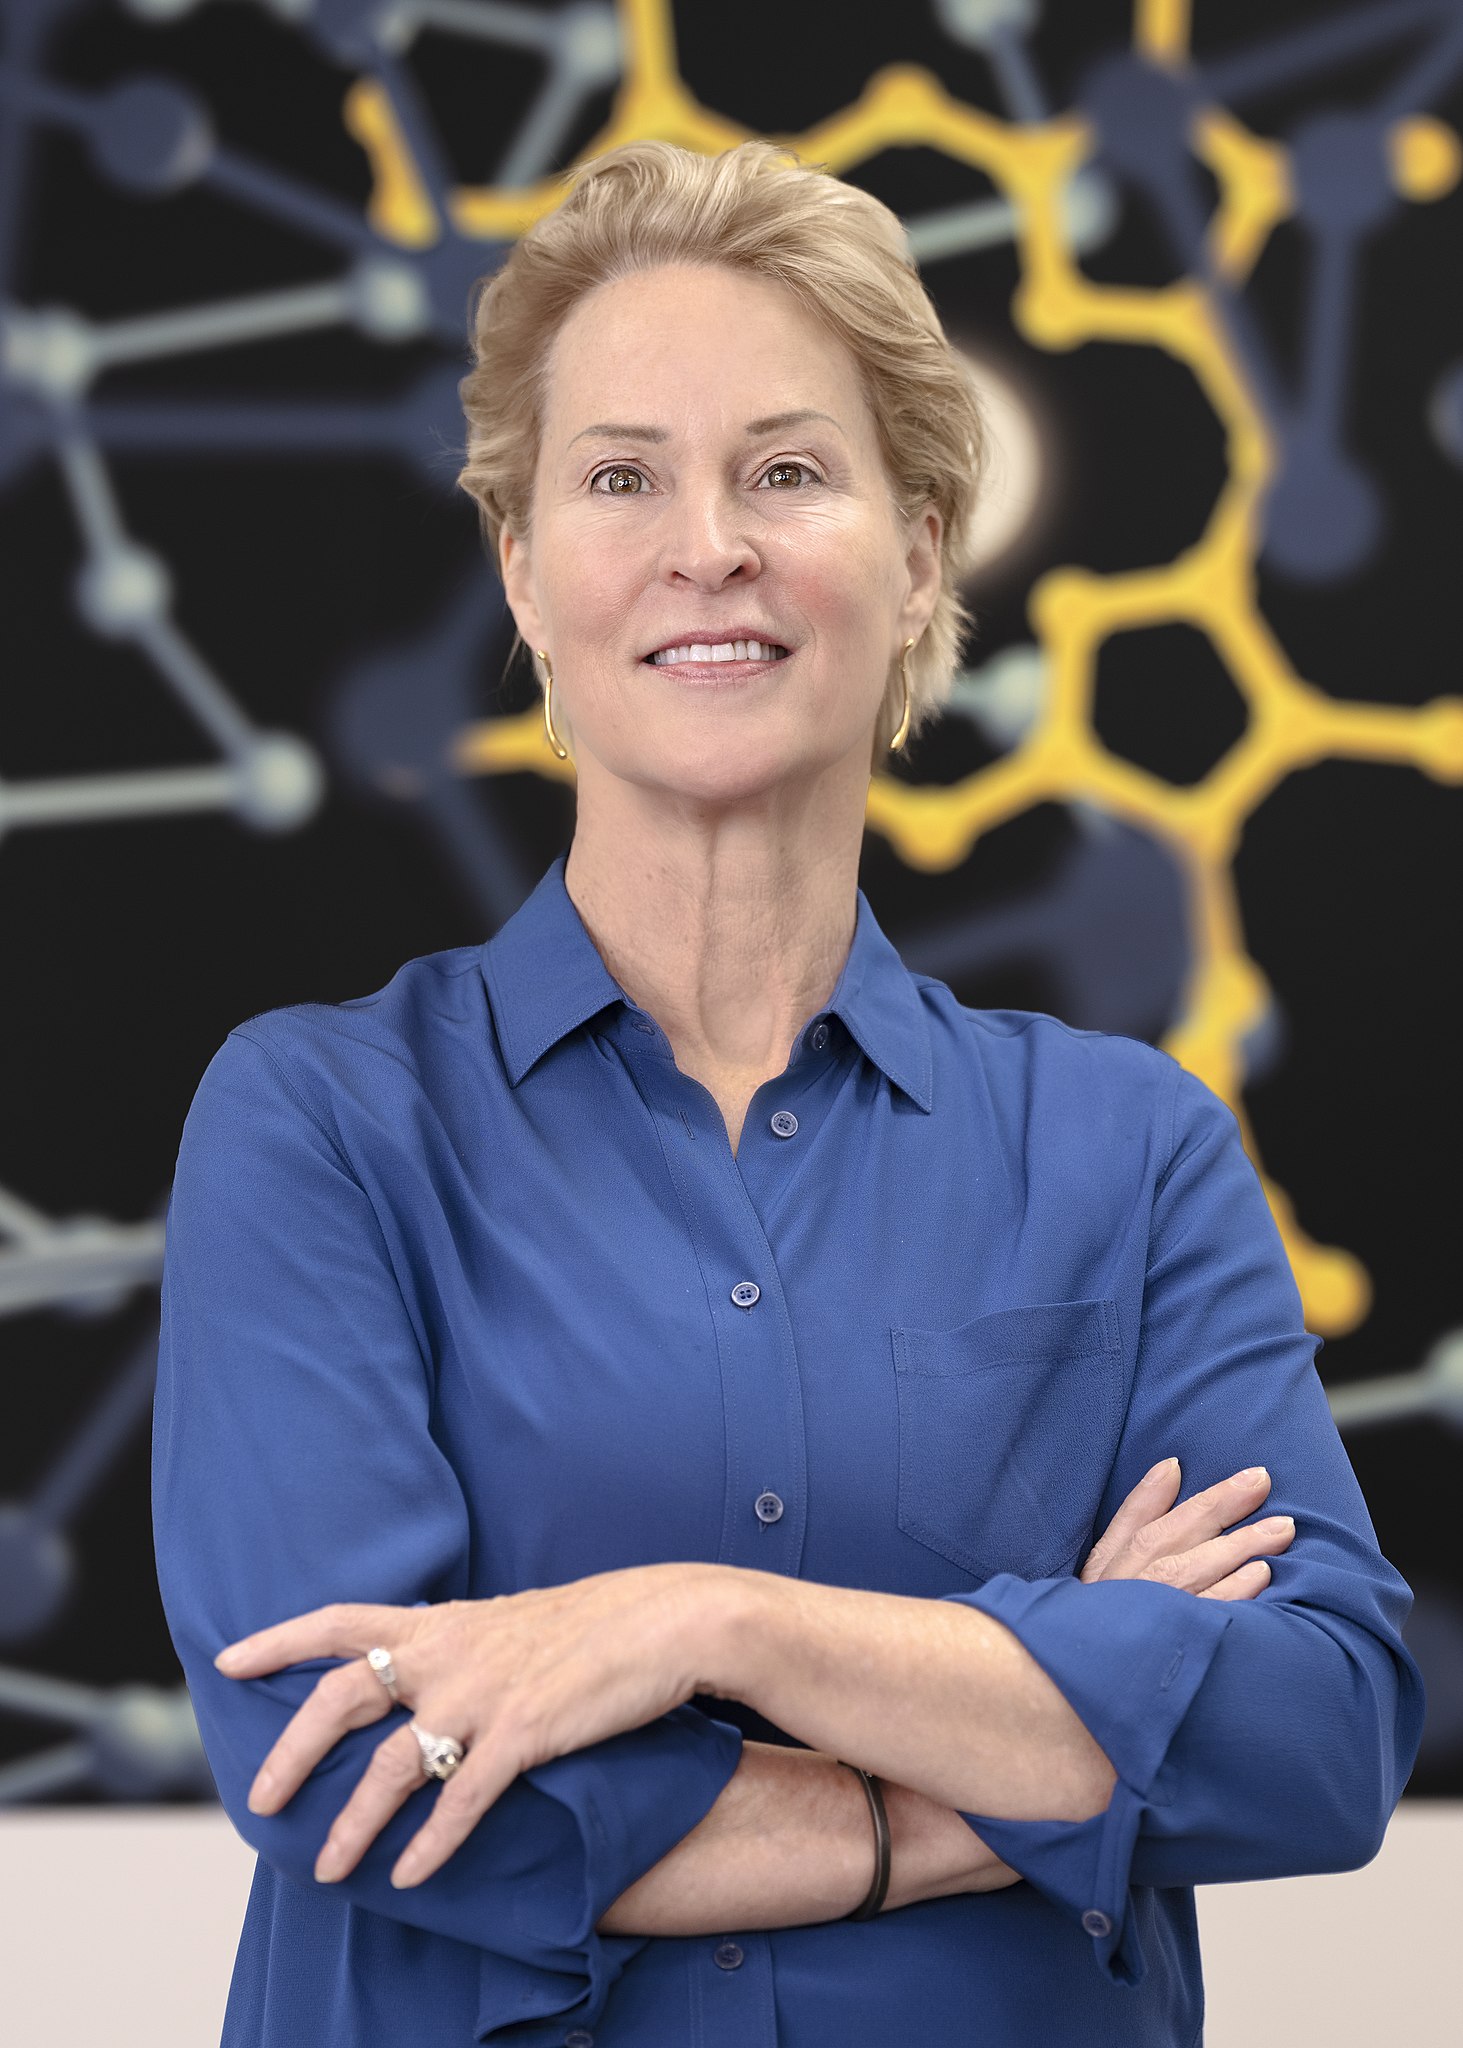 Frances Arnold at Caltech in 2021 02 2.jpg